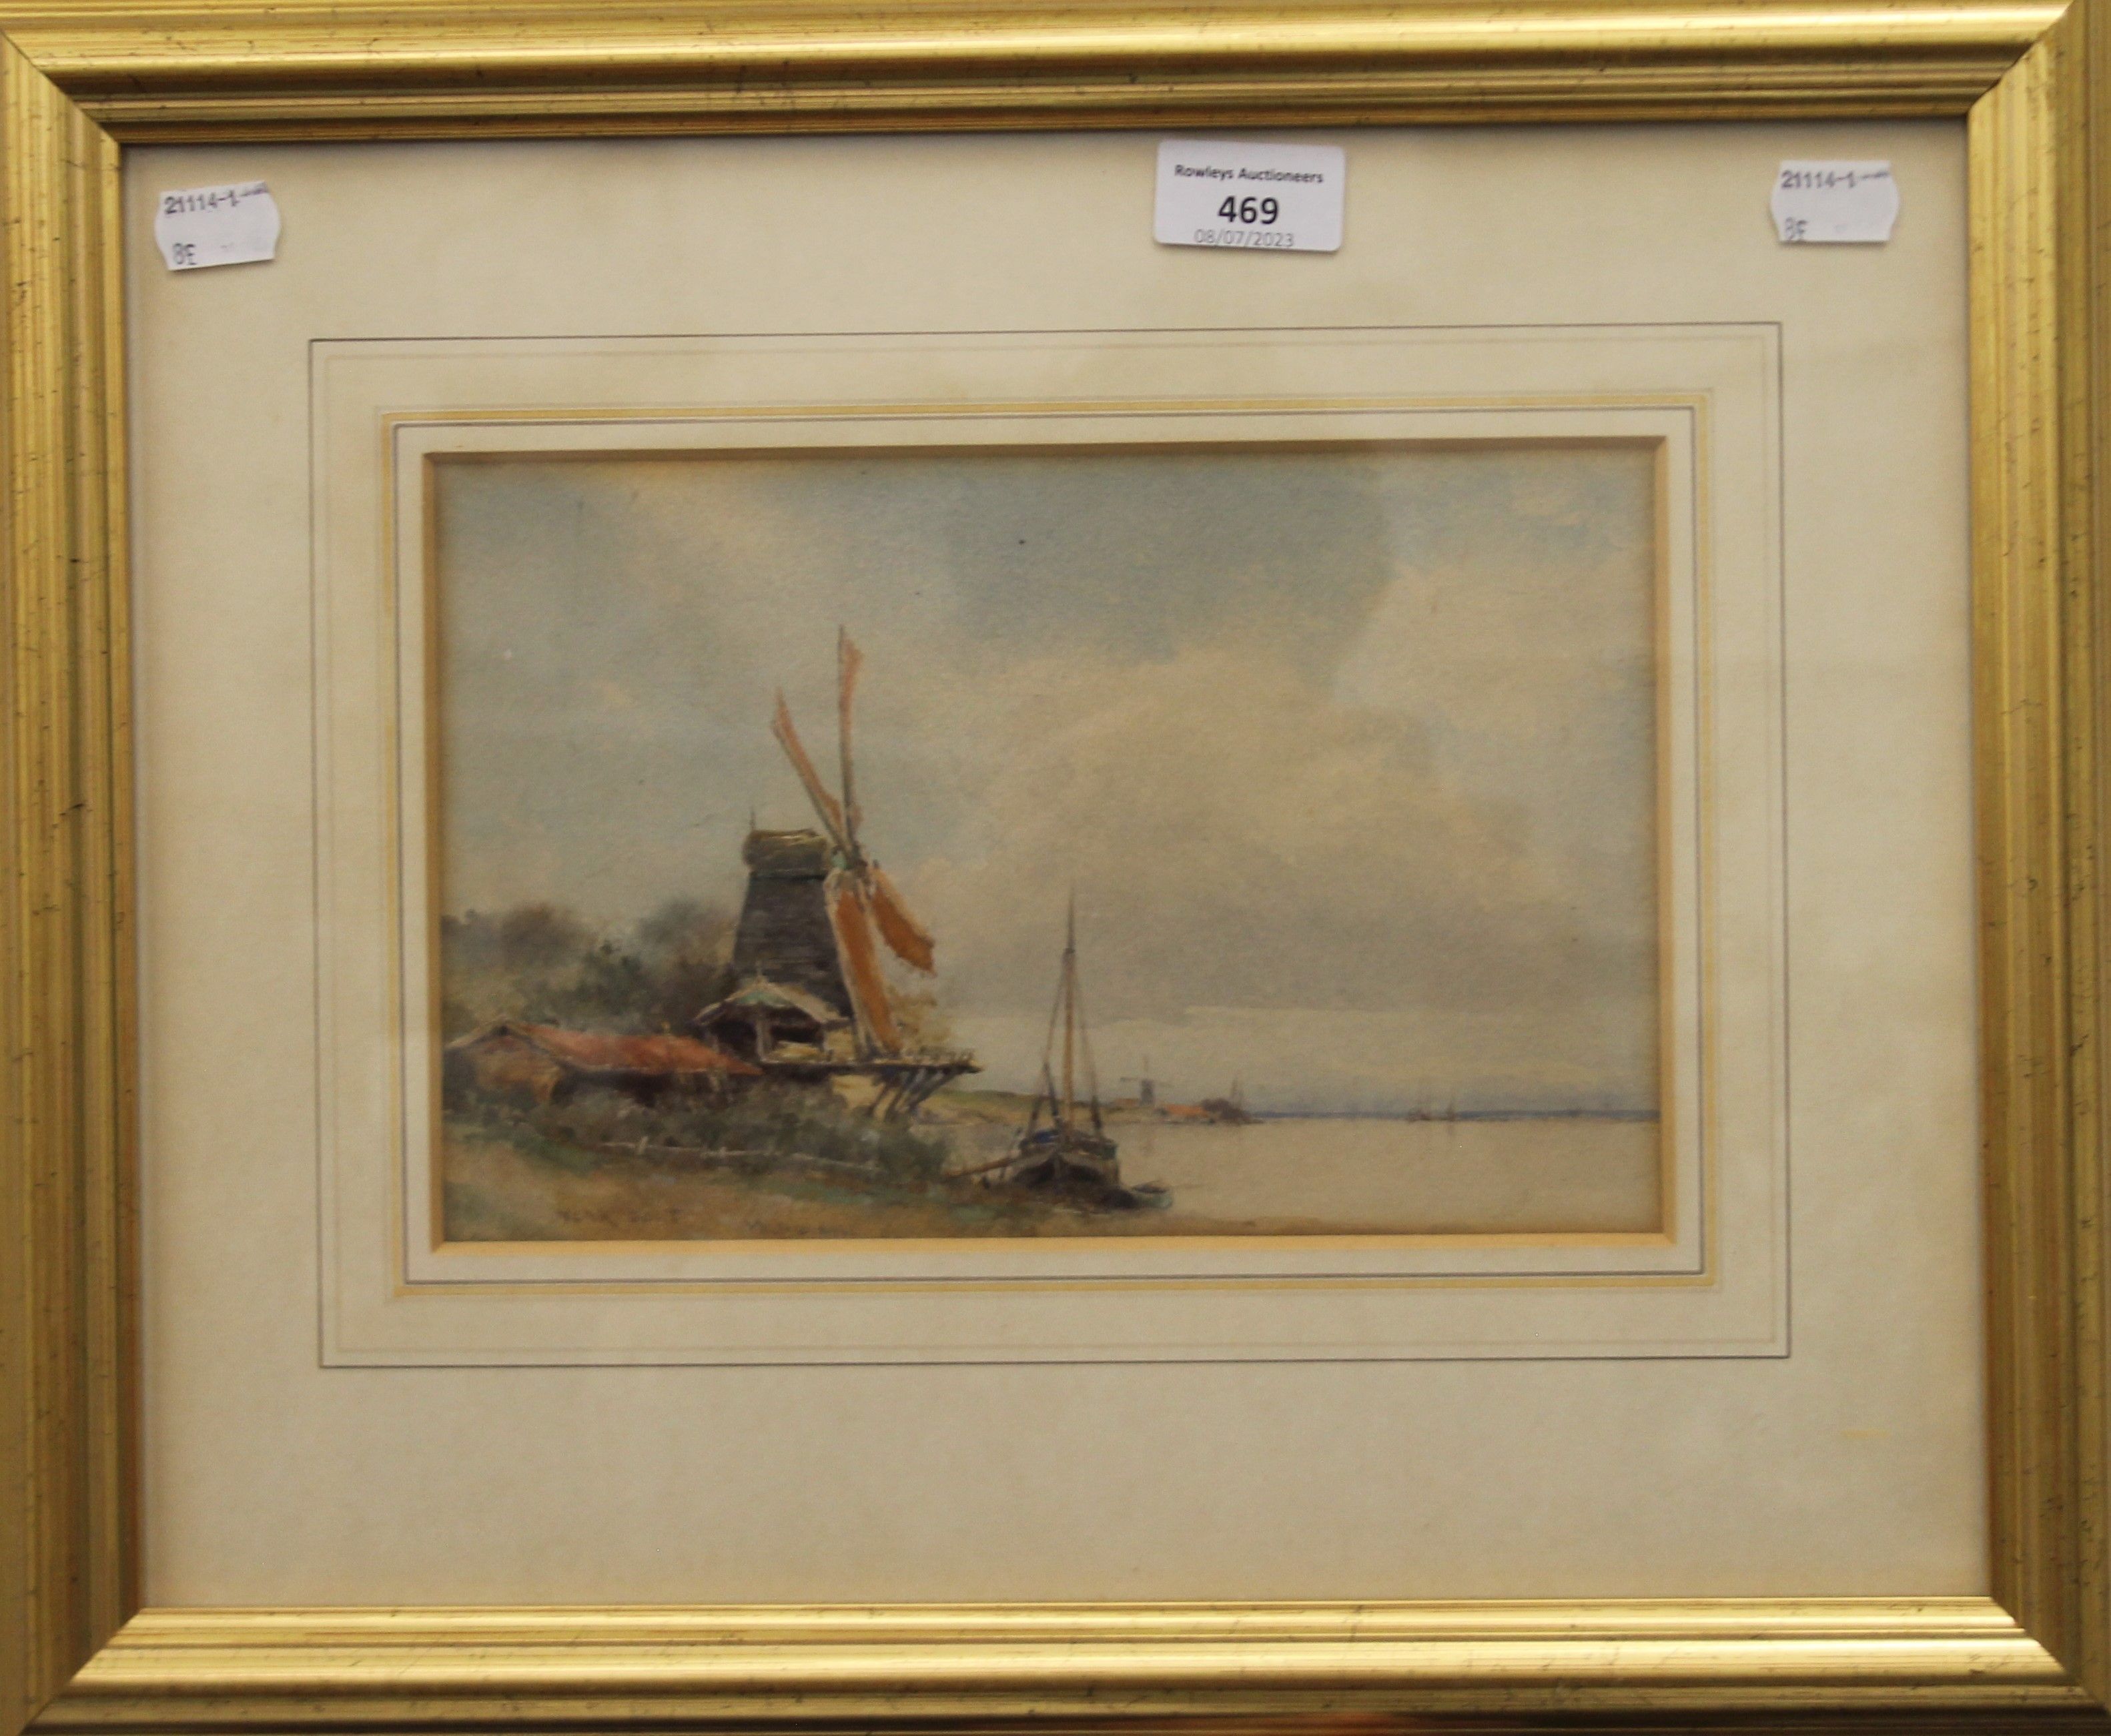 WILFRED WILLIAMS BALL RBA RE (1853-1917), Near Dort, watercolour, signed, framed and glazed. - Image 2 of 3